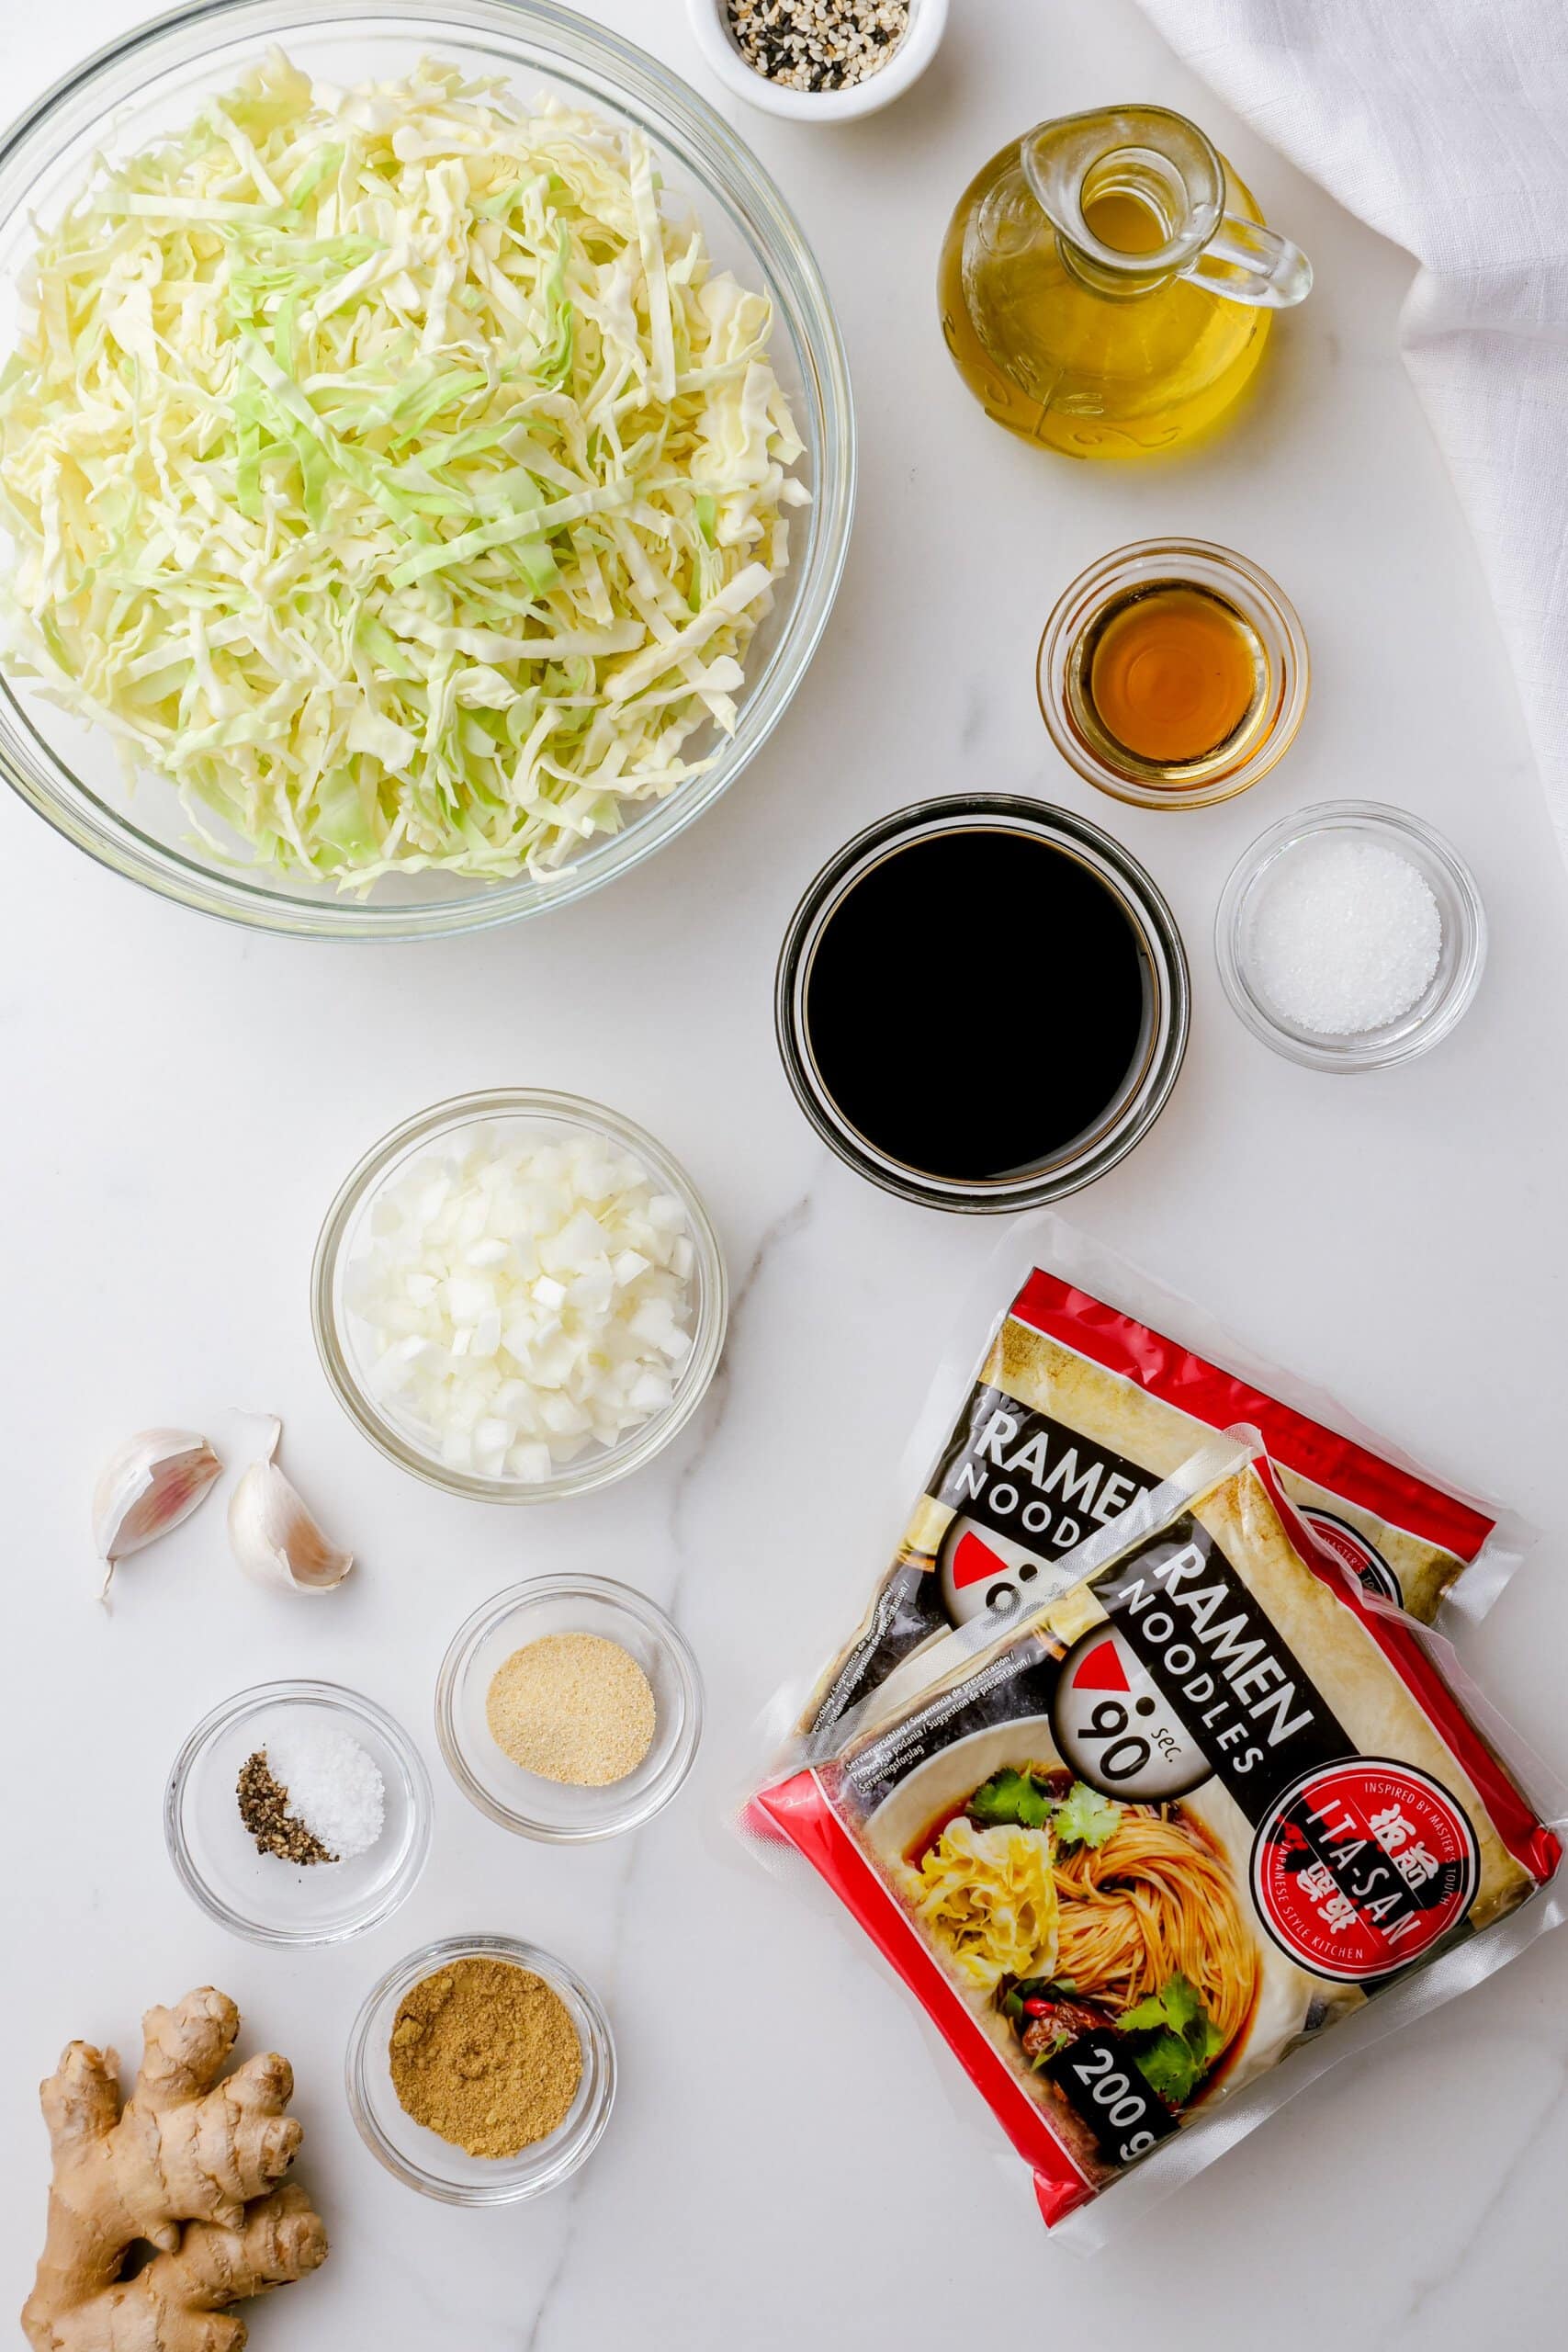 How To Make La Choy Chow Mein Noodles?